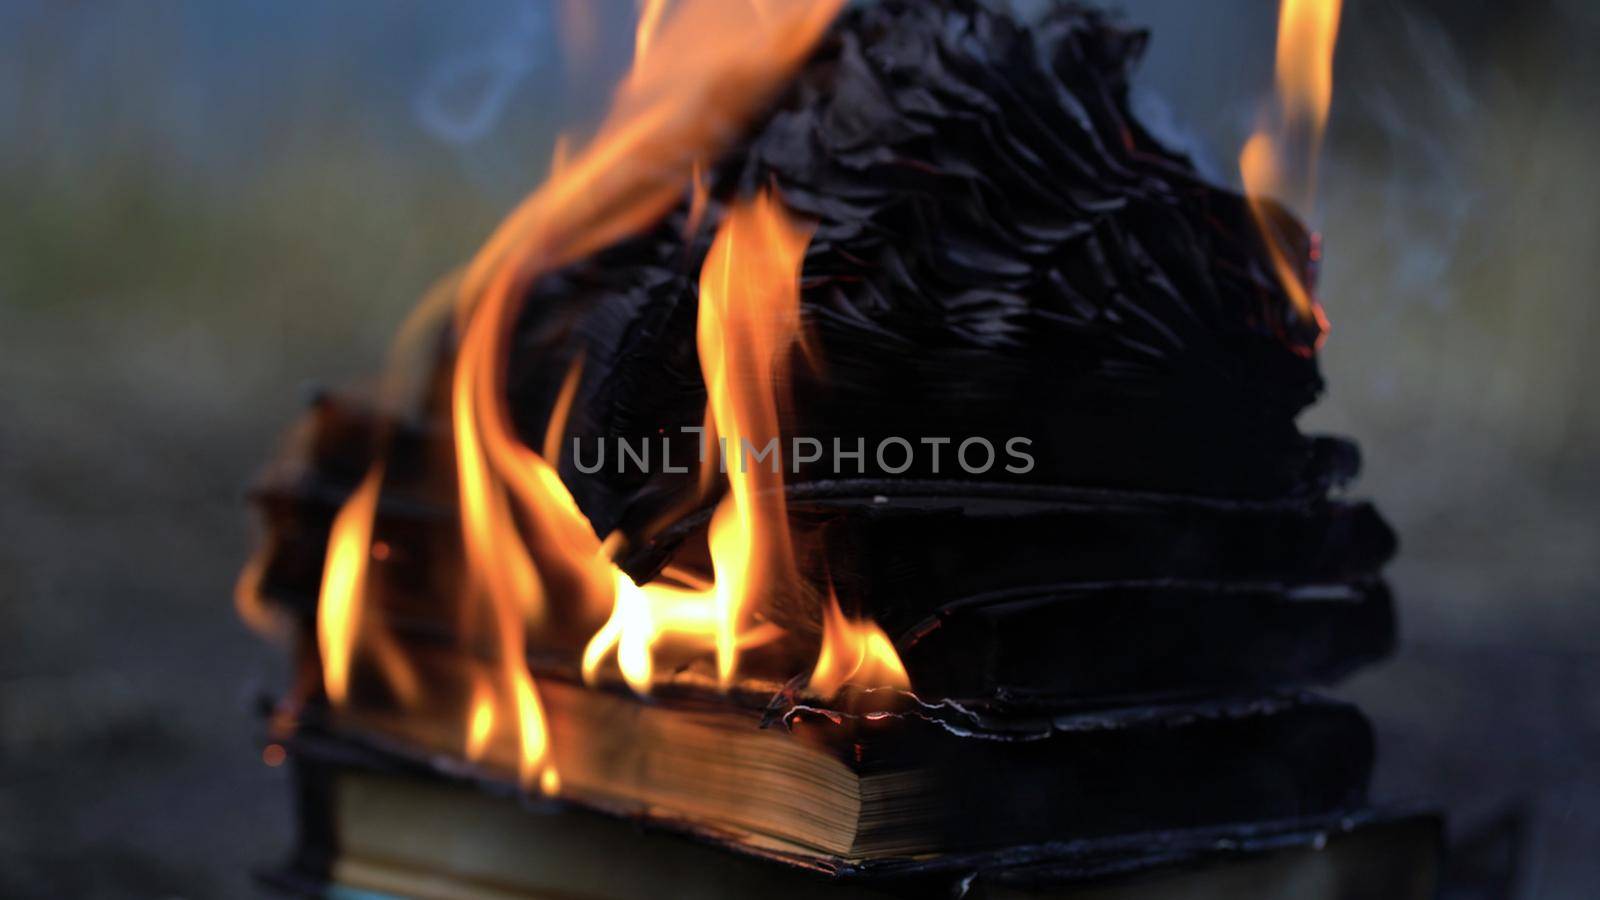 A stack of old books on fire burns on the ground.